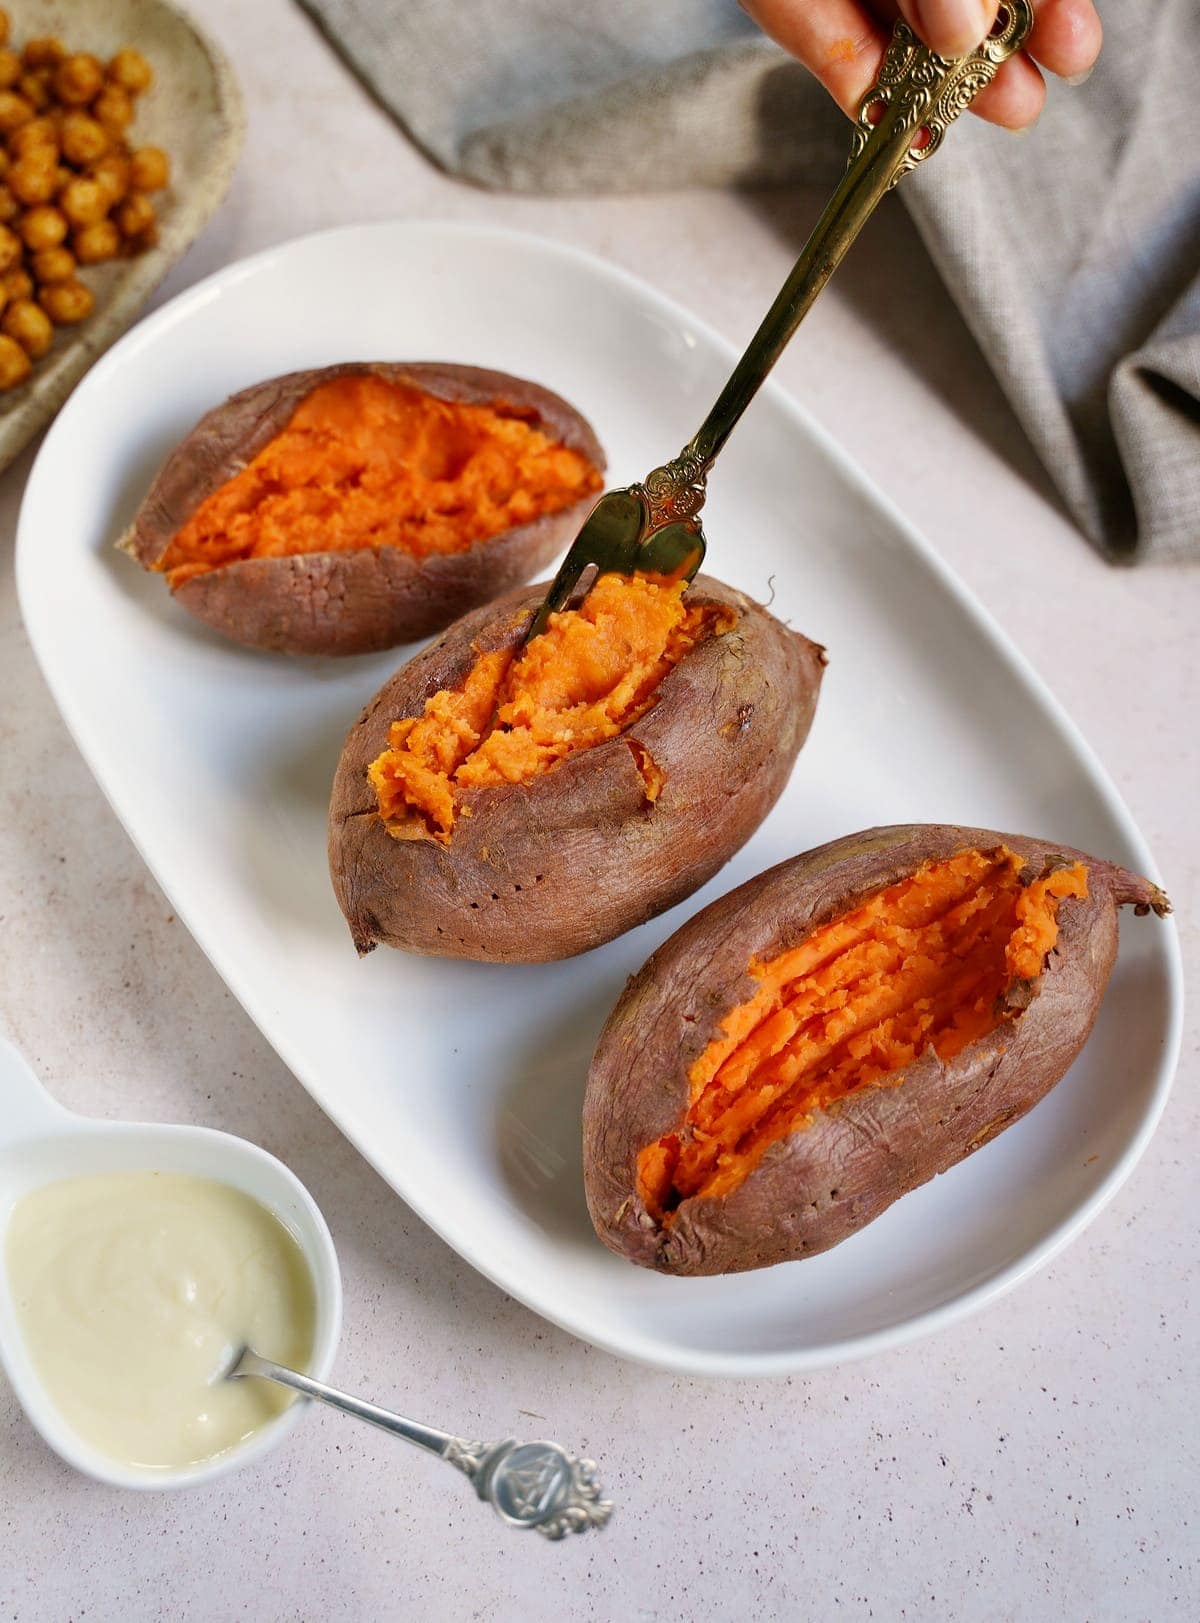 Fluffing a baked sweet potato with a fork